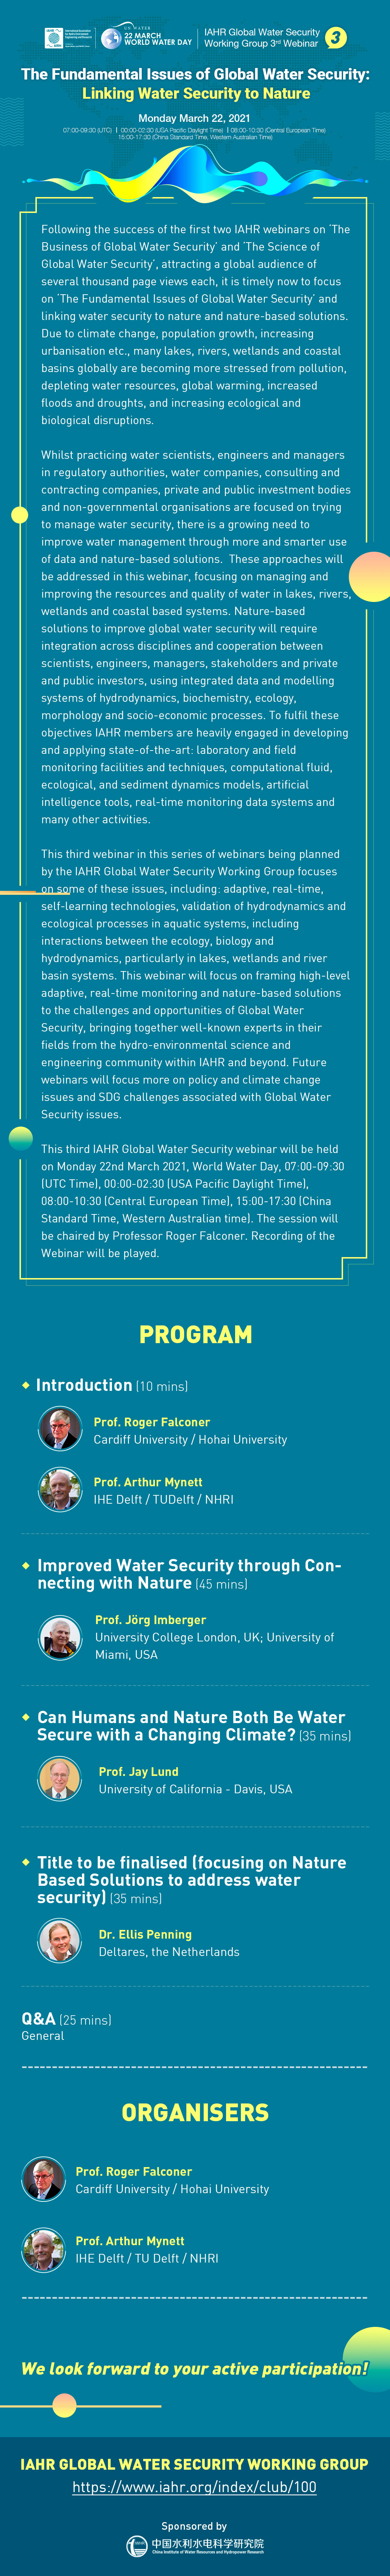 The-Business-of-Global-Water-Security--Linking-Knowledge-to-Practice-详情-简化2.jpg